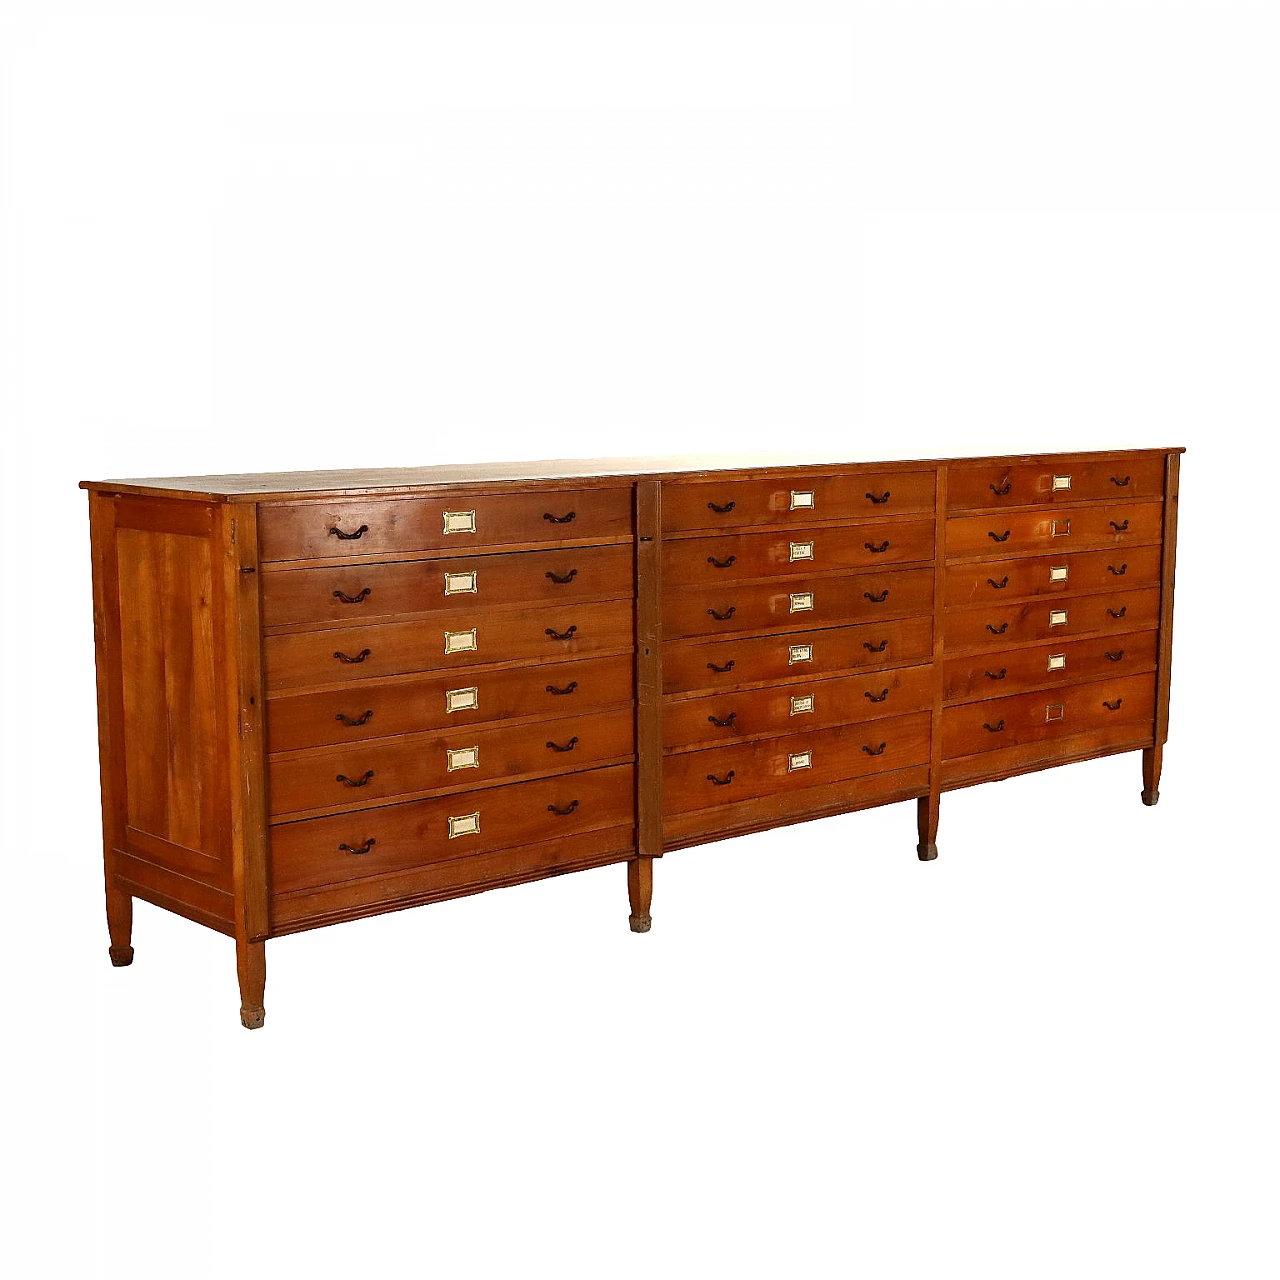 Three-section cherry wood chest of drawers with movable uprights 1